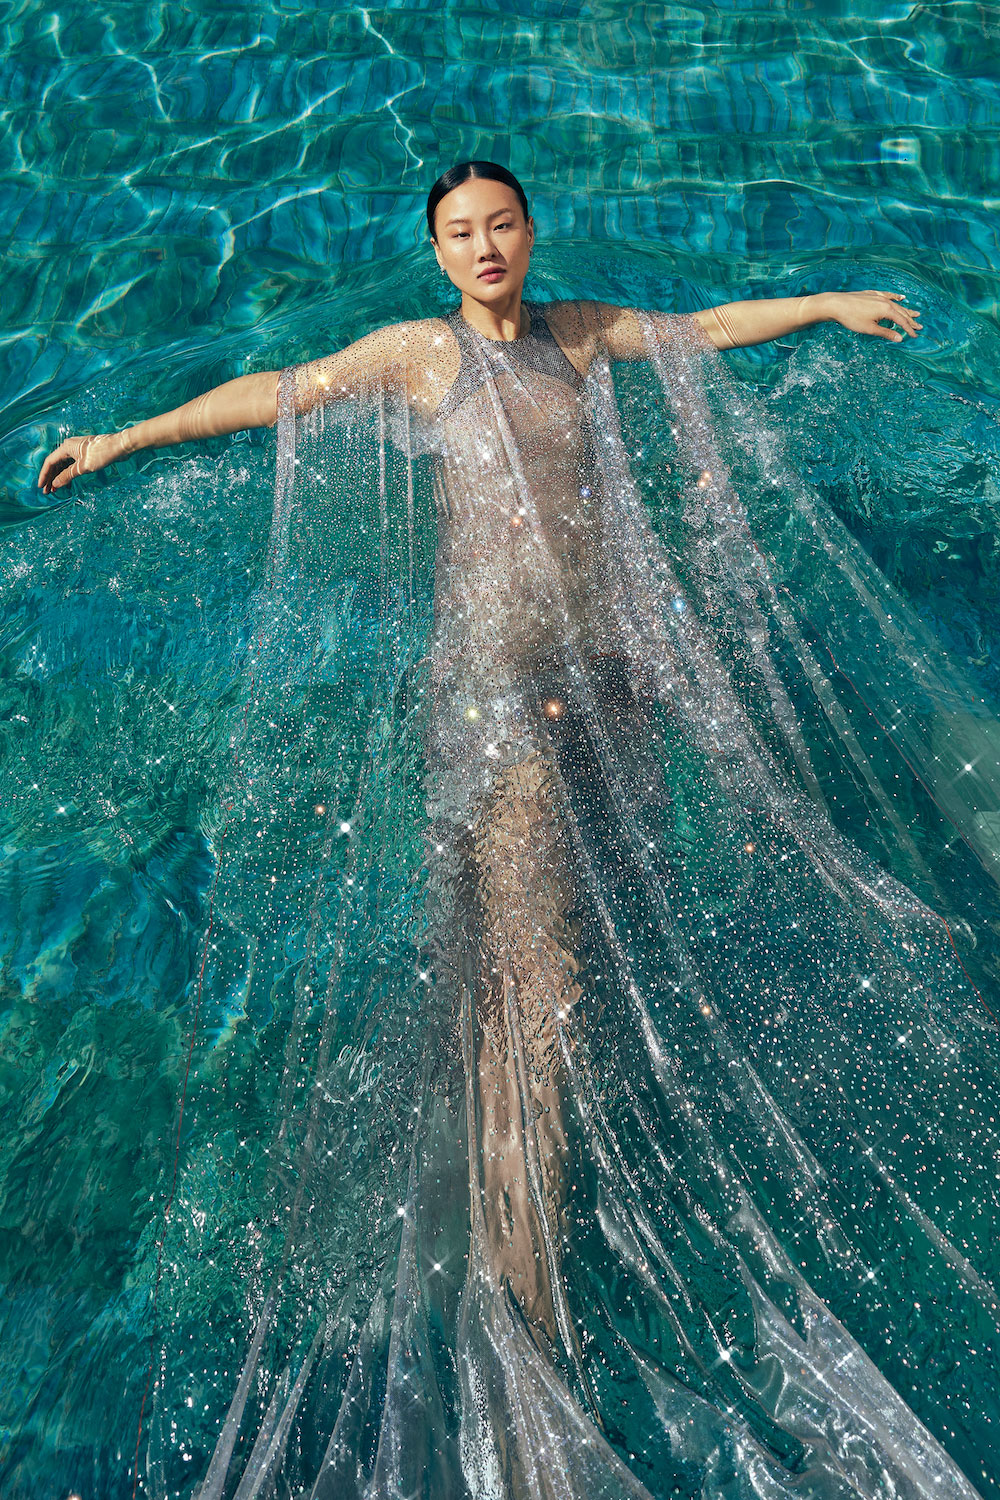 Dive Into Sizzling Summer Style In Our New Issue